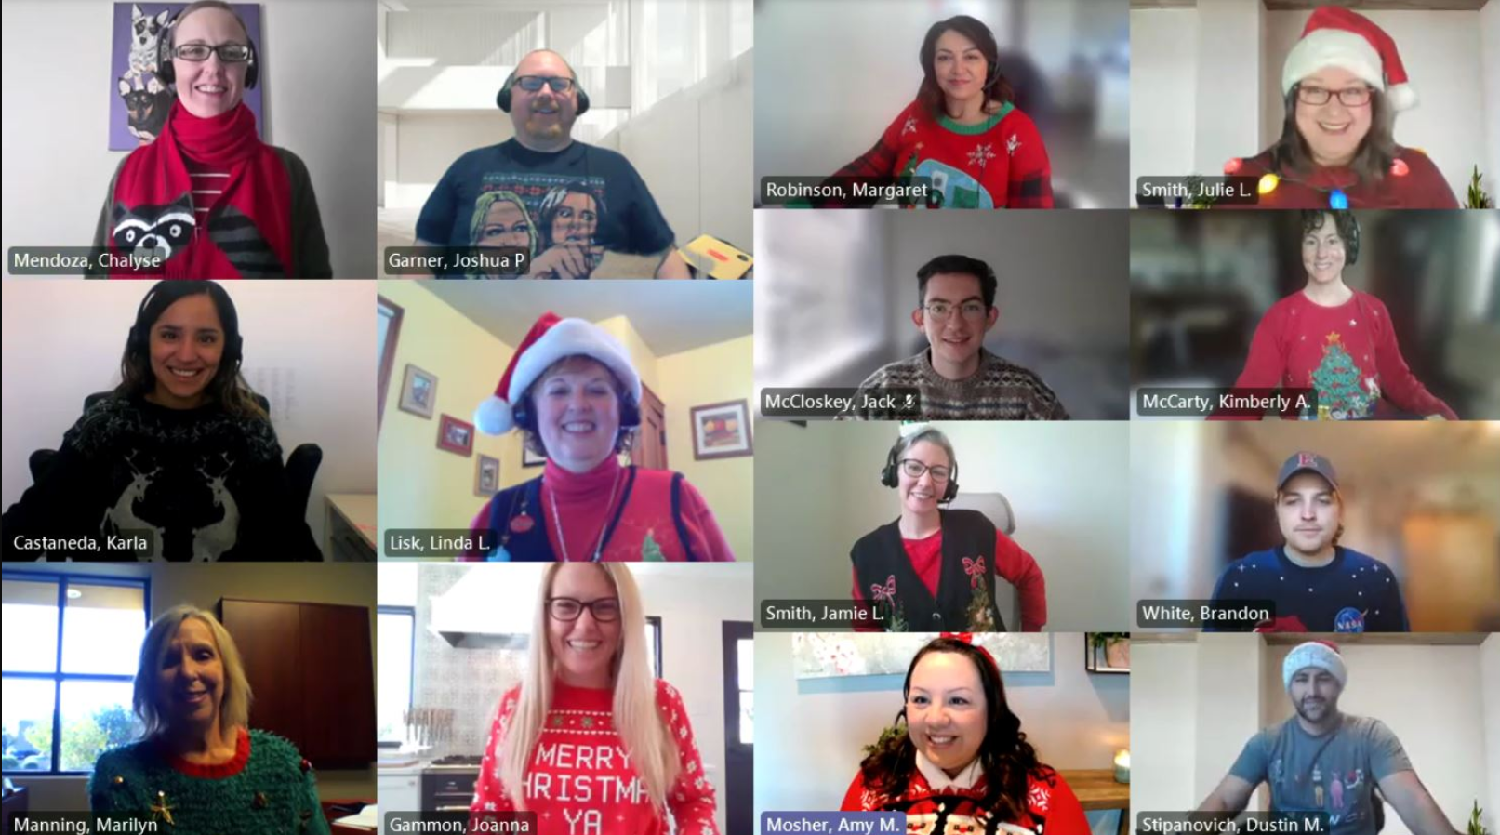 The HR team spending the holidays together virtually.